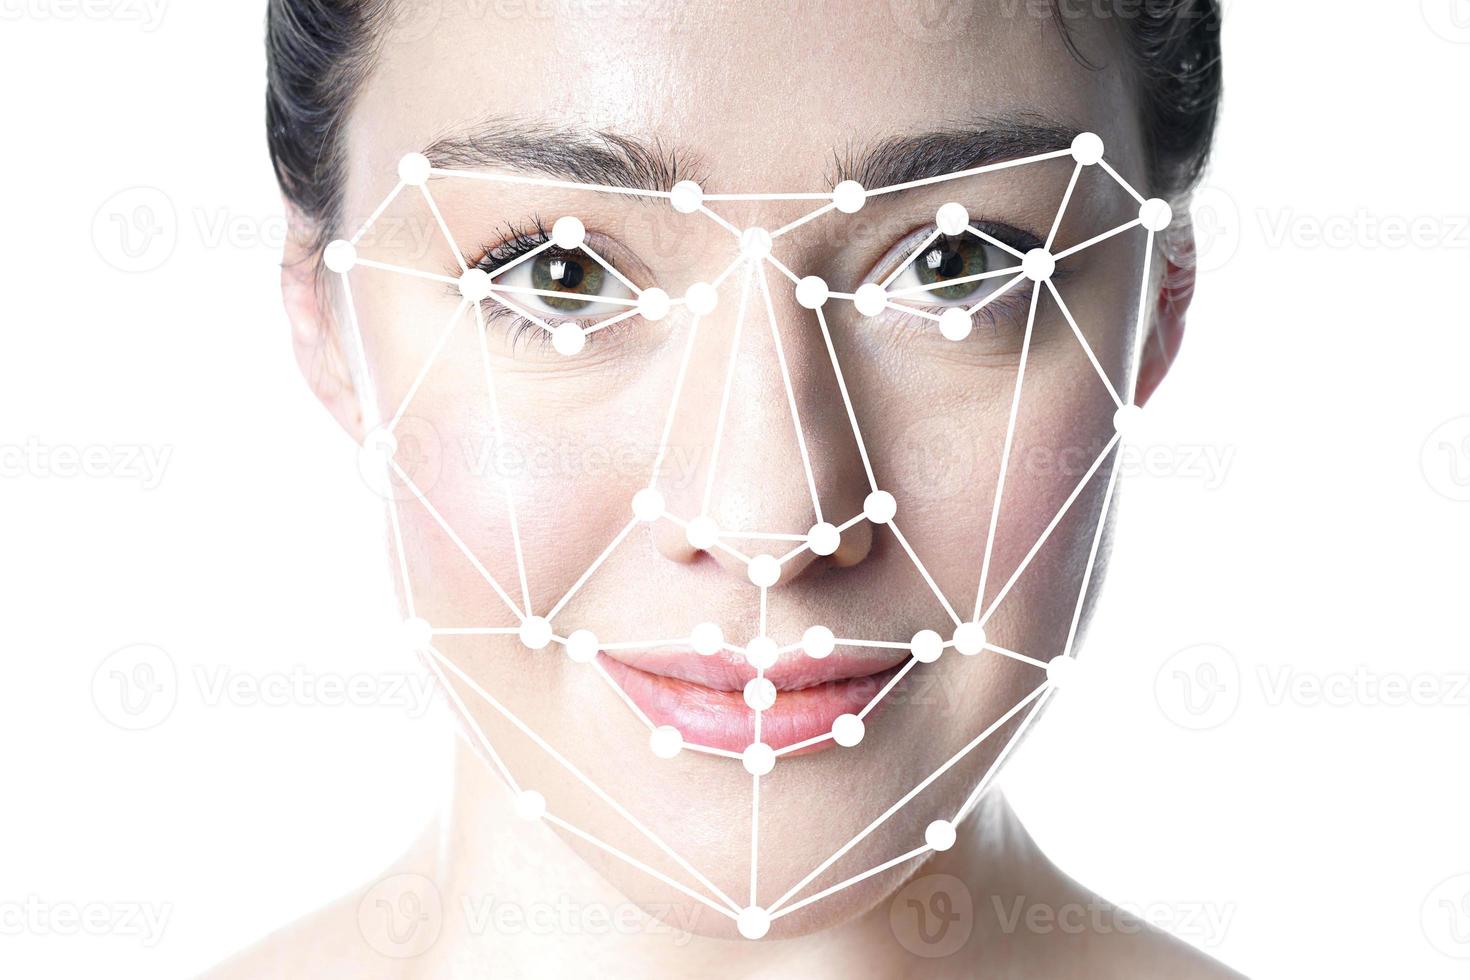 face detection or facial recognition grid overlay on face of woman photo